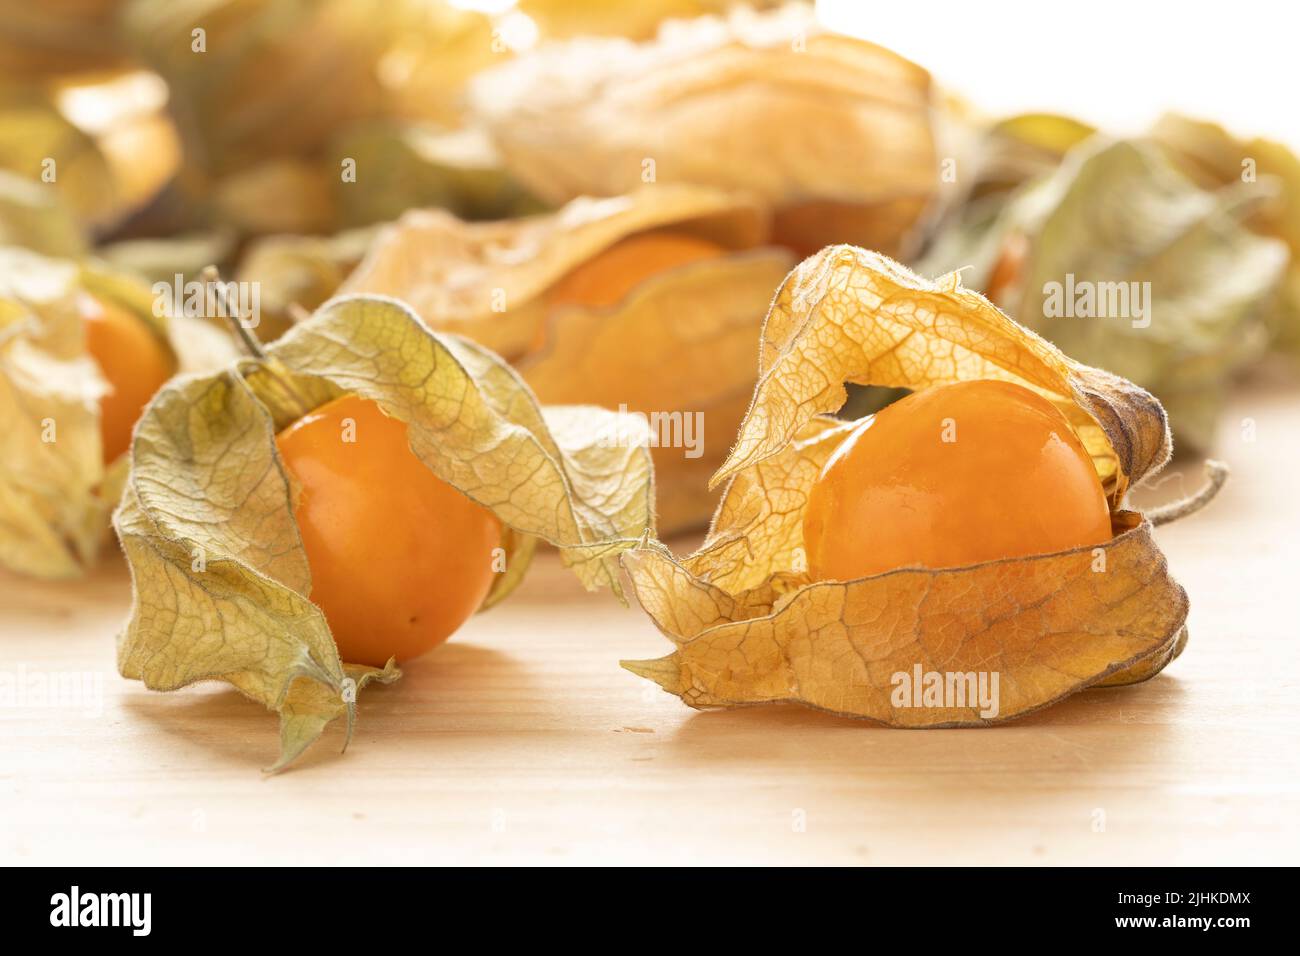 Fresh Cape gooseberry, Physalis Peruviana, with husk on wooden background  close up Stock Photo